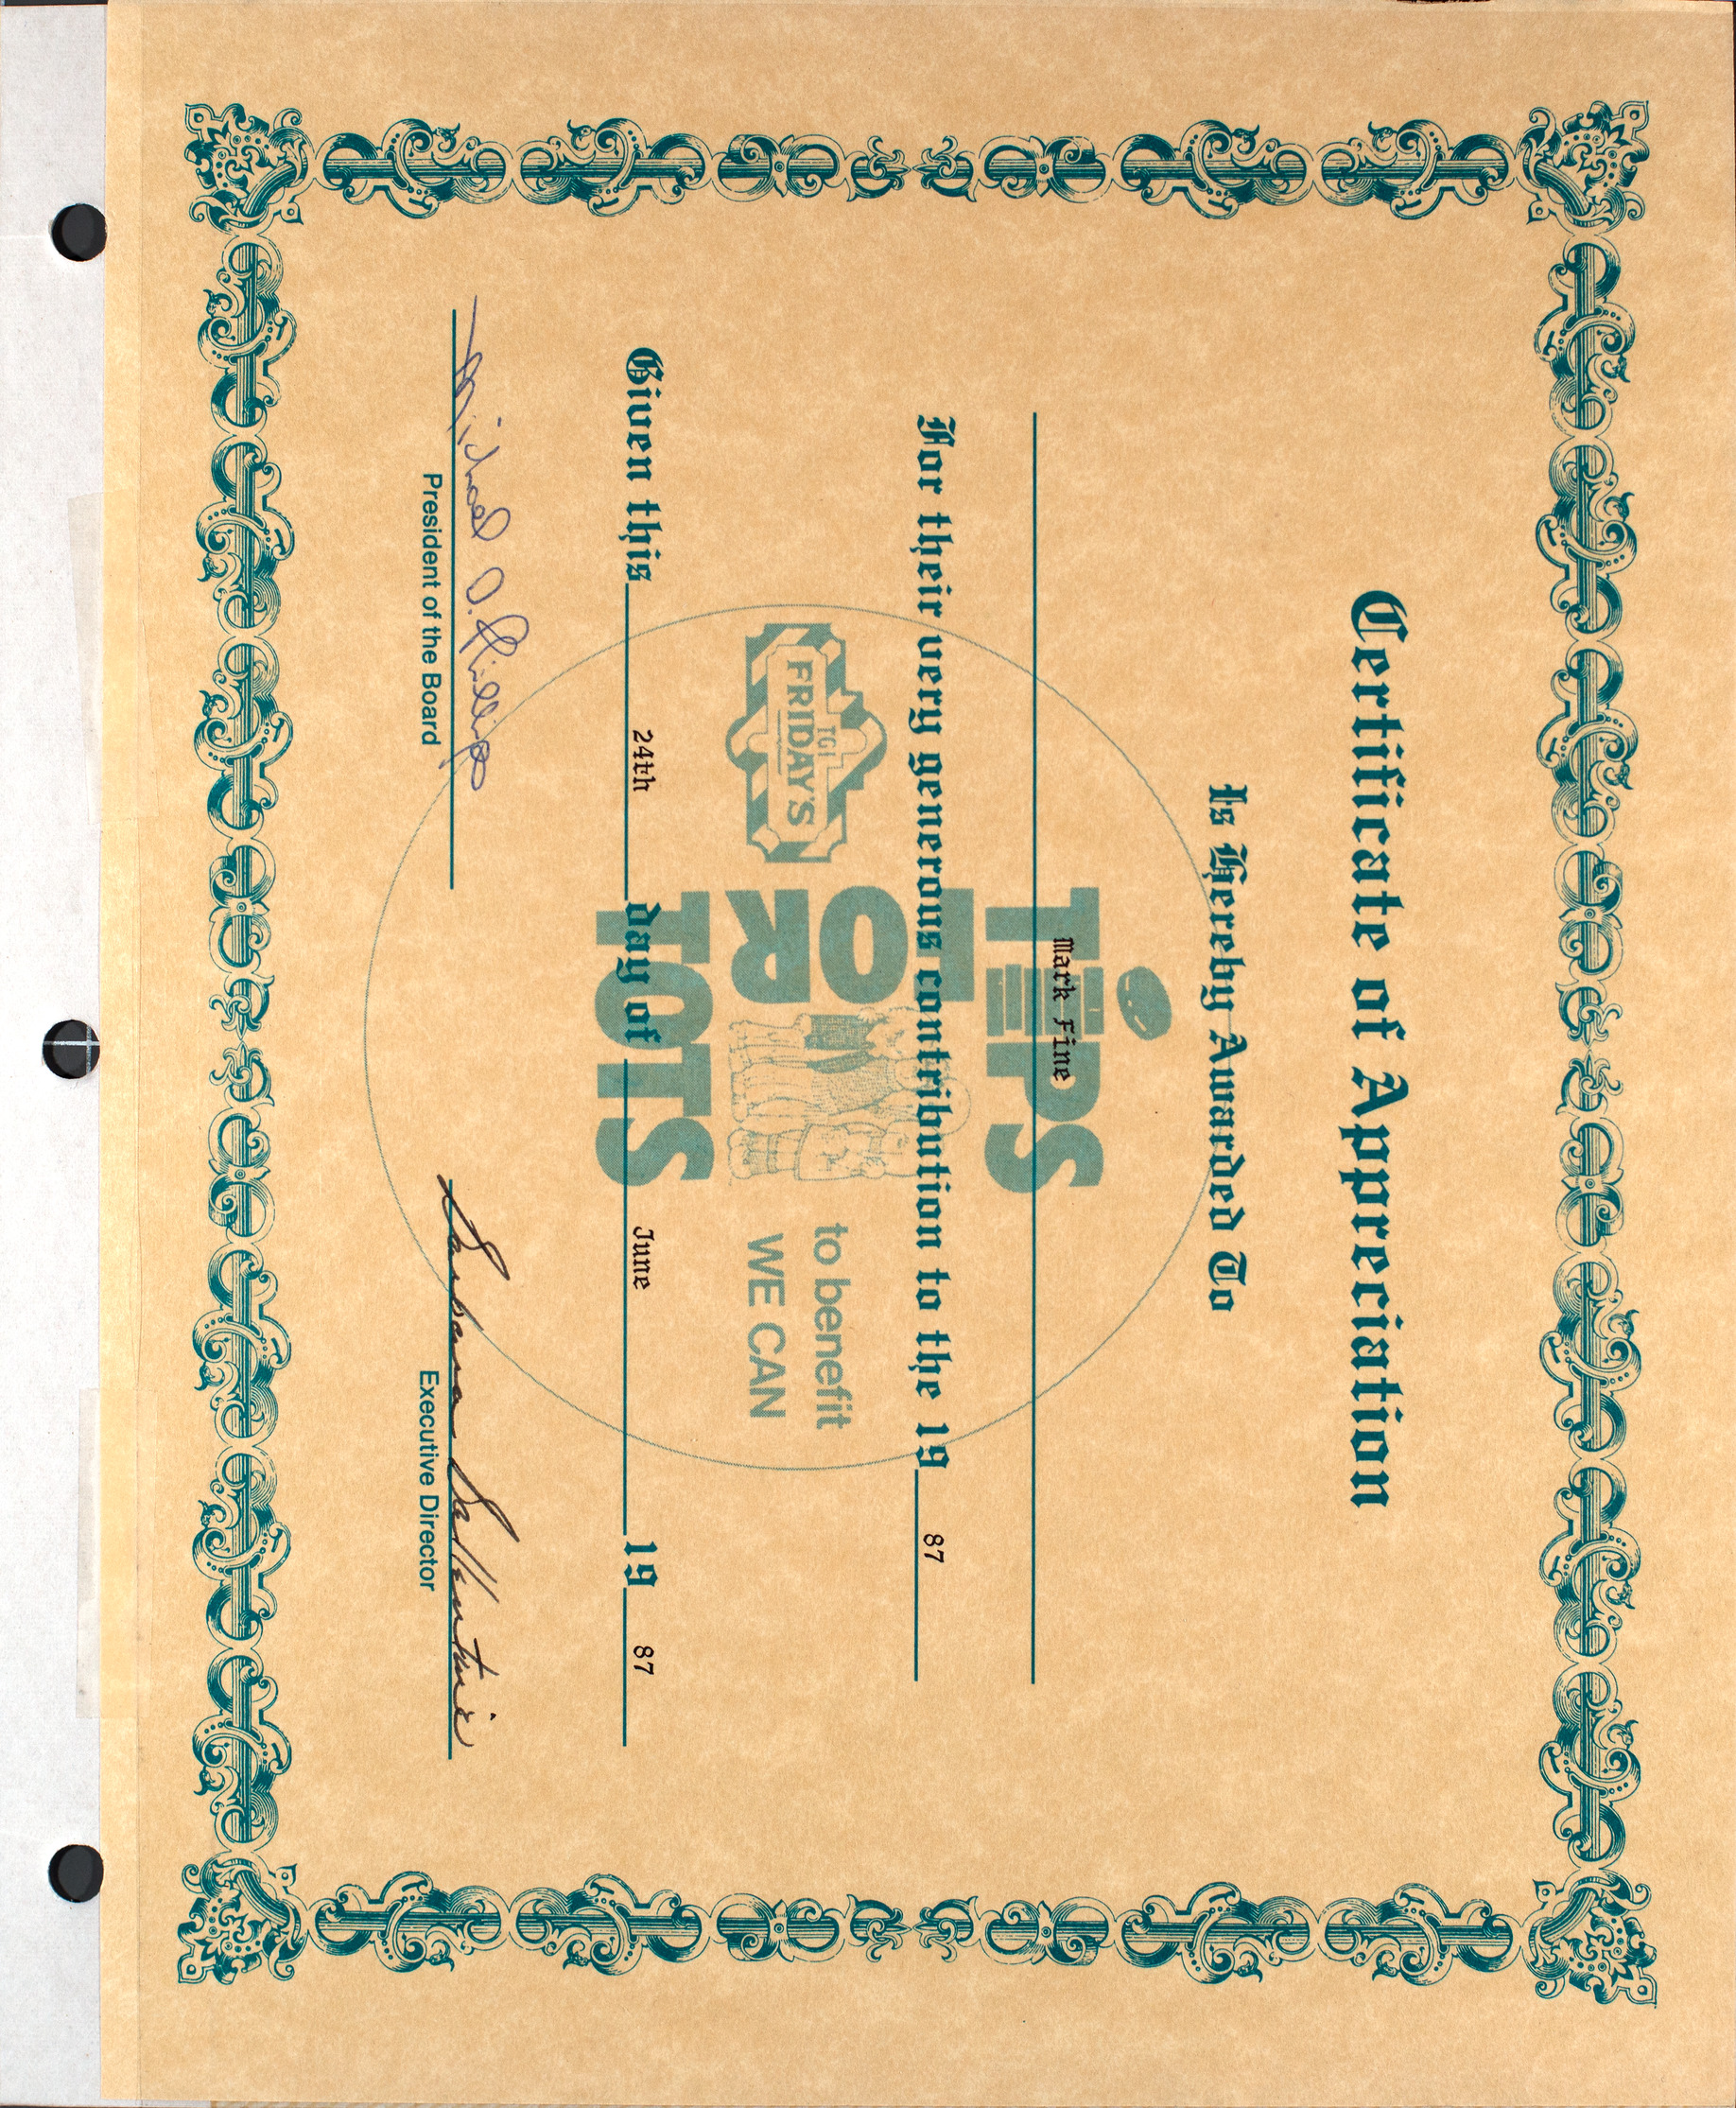 Certificate of Appreciation for Mark Fine from Tips for Tots, June 24, 1987